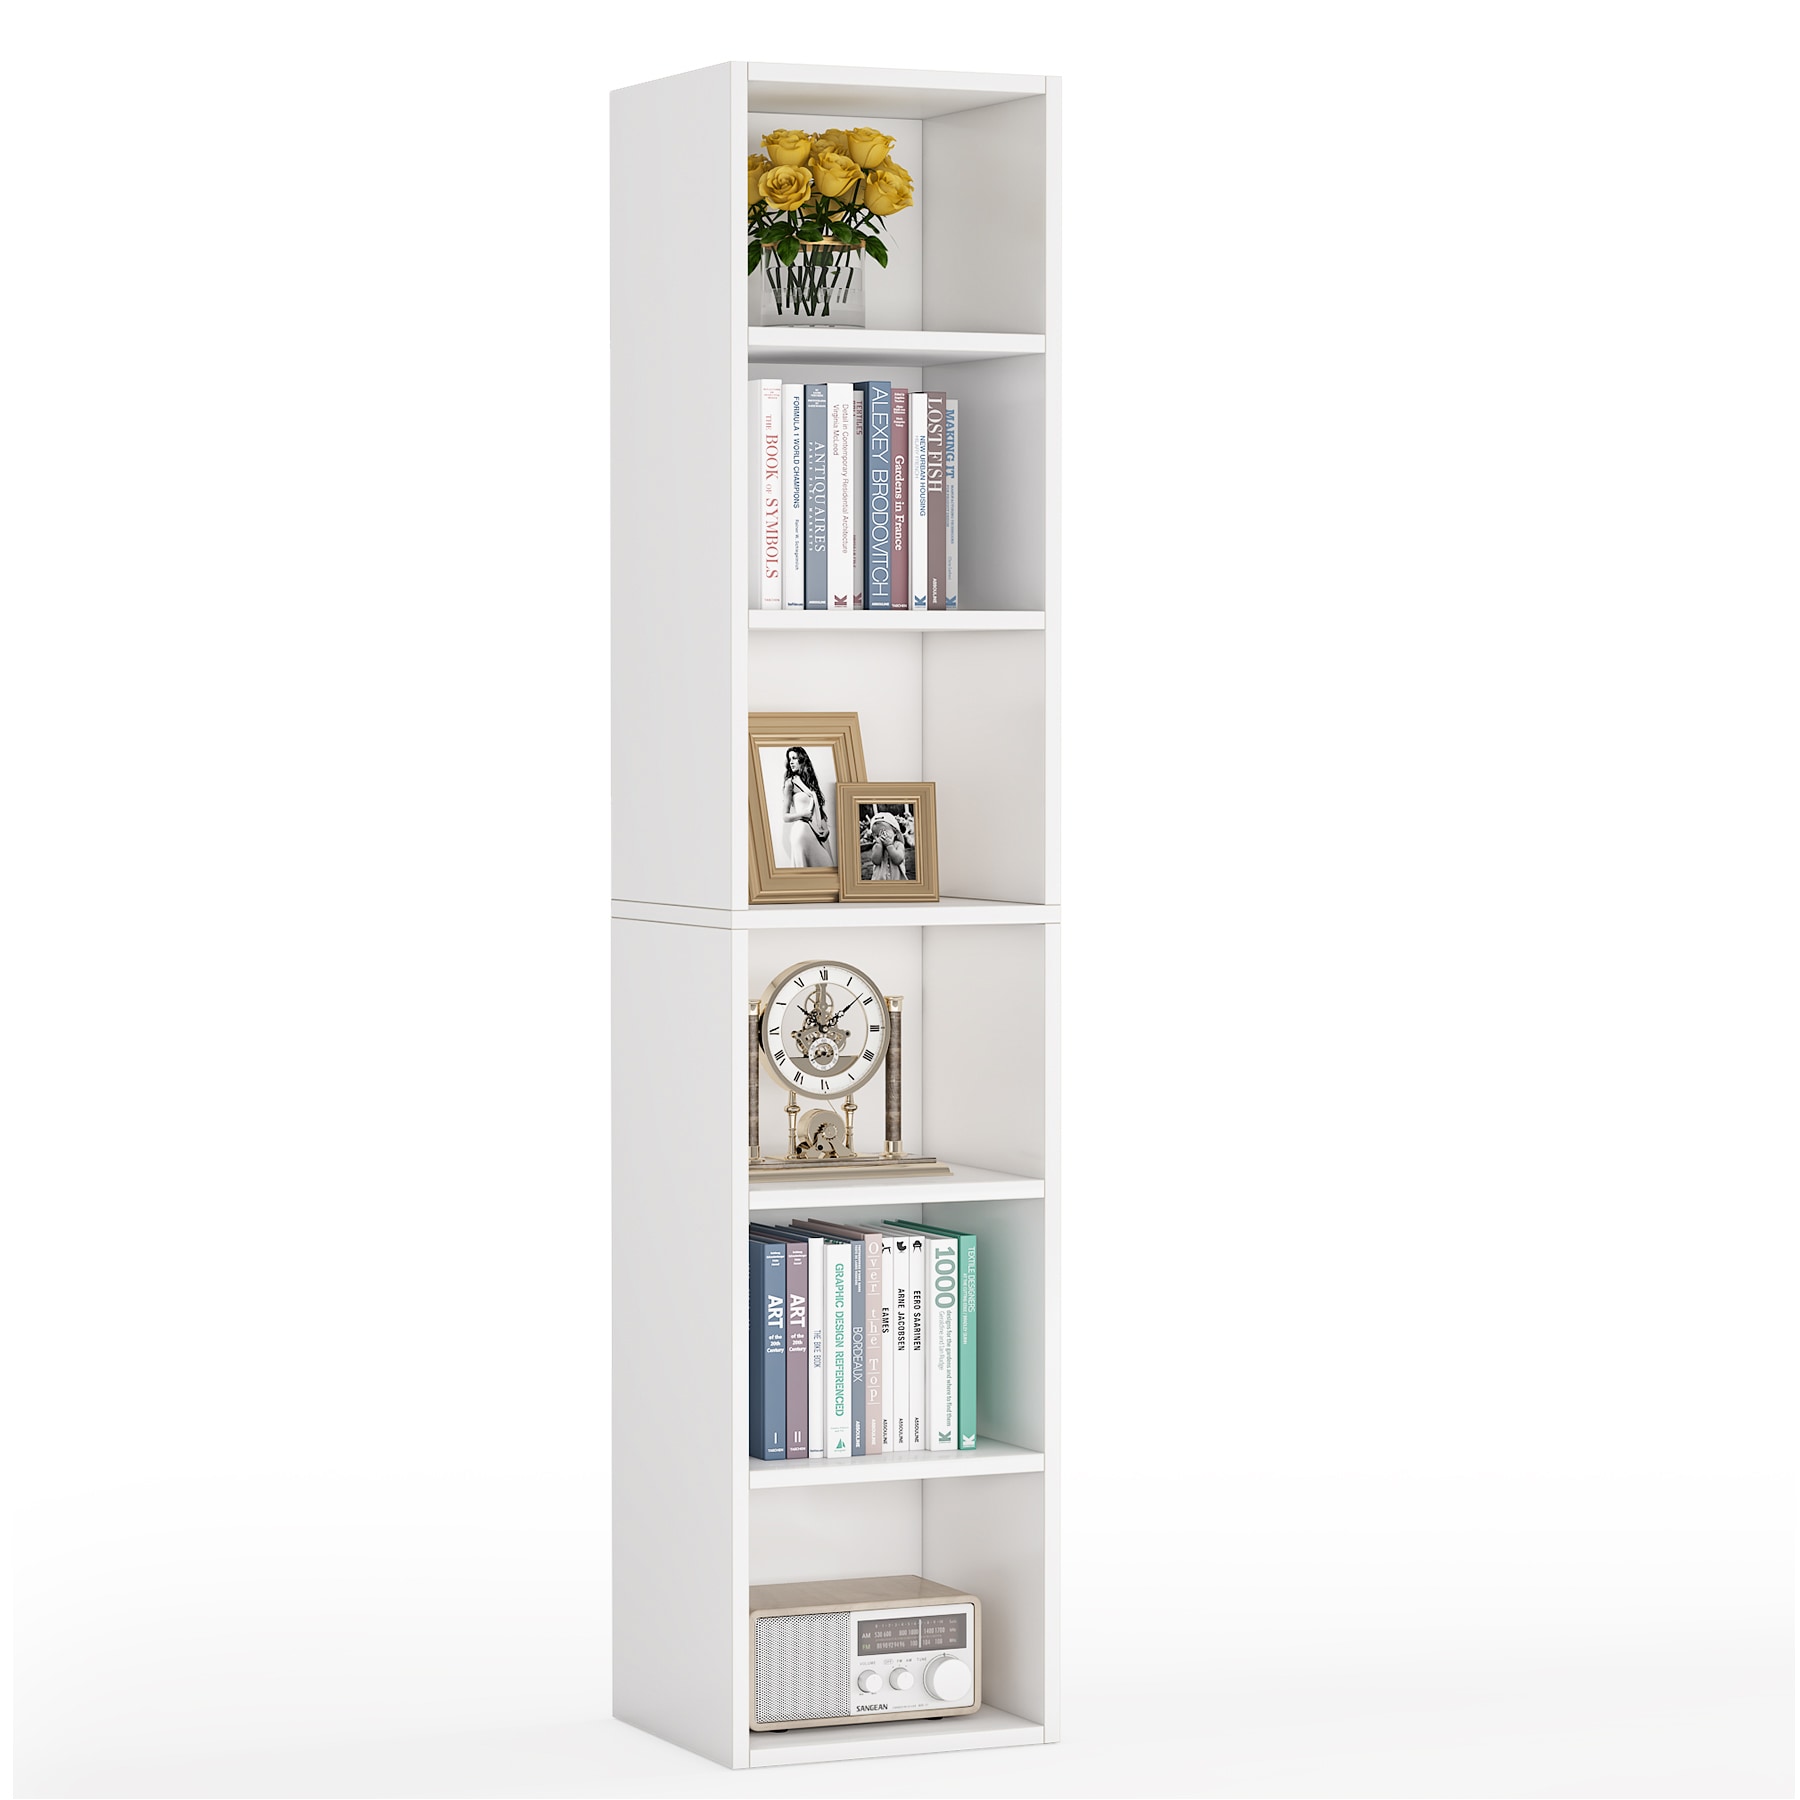 Tribesigns White and Gold Metal 6-Shelf Corner Bookcase with Doors (15.75-in W x 73.22-in H x 15.75-in D) Unfinished | HOGA-NY051